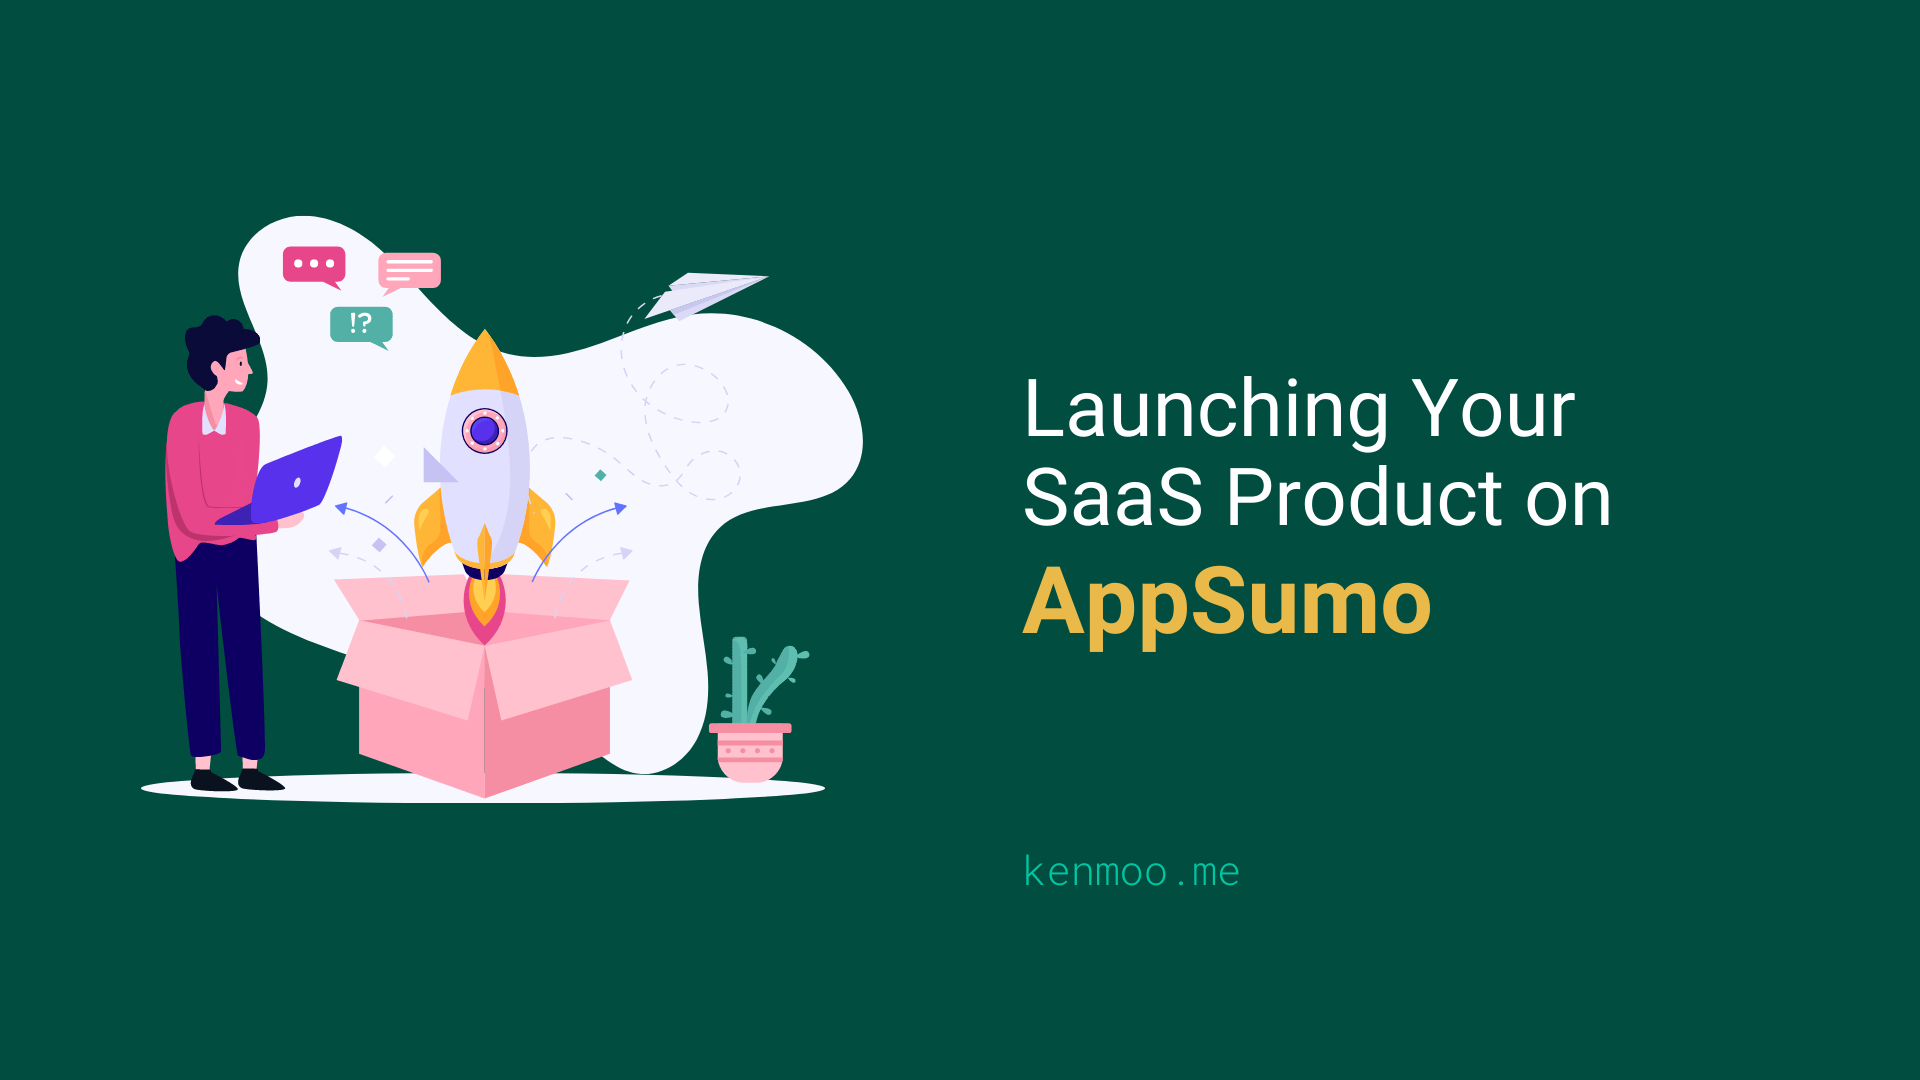 Launching Your SaaS Product on AppSumo: Passing the Evaluation